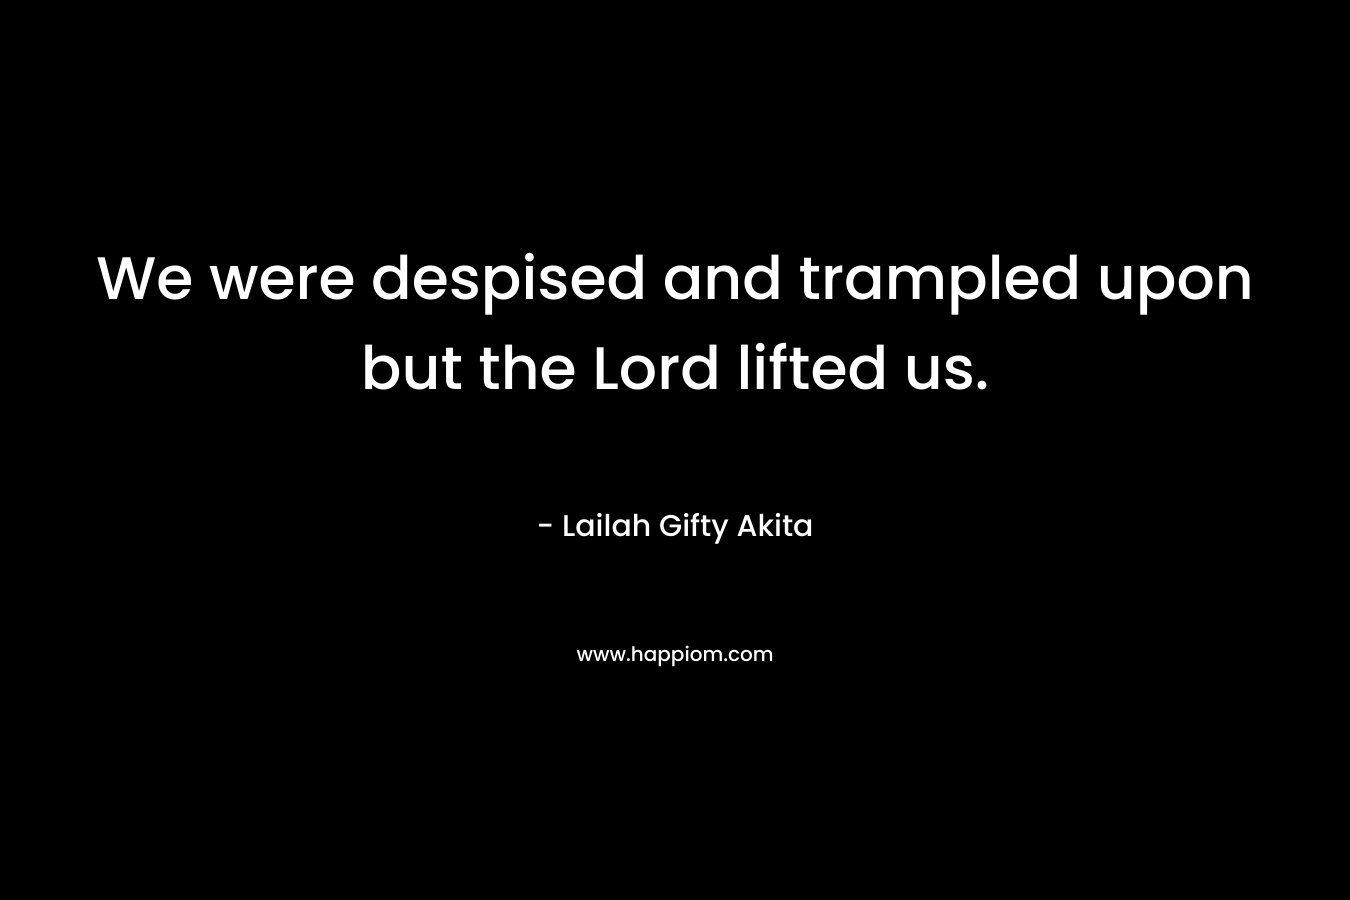 We were despised and trampled upon but the Lord lifted us. – Lailah Gifty Akita